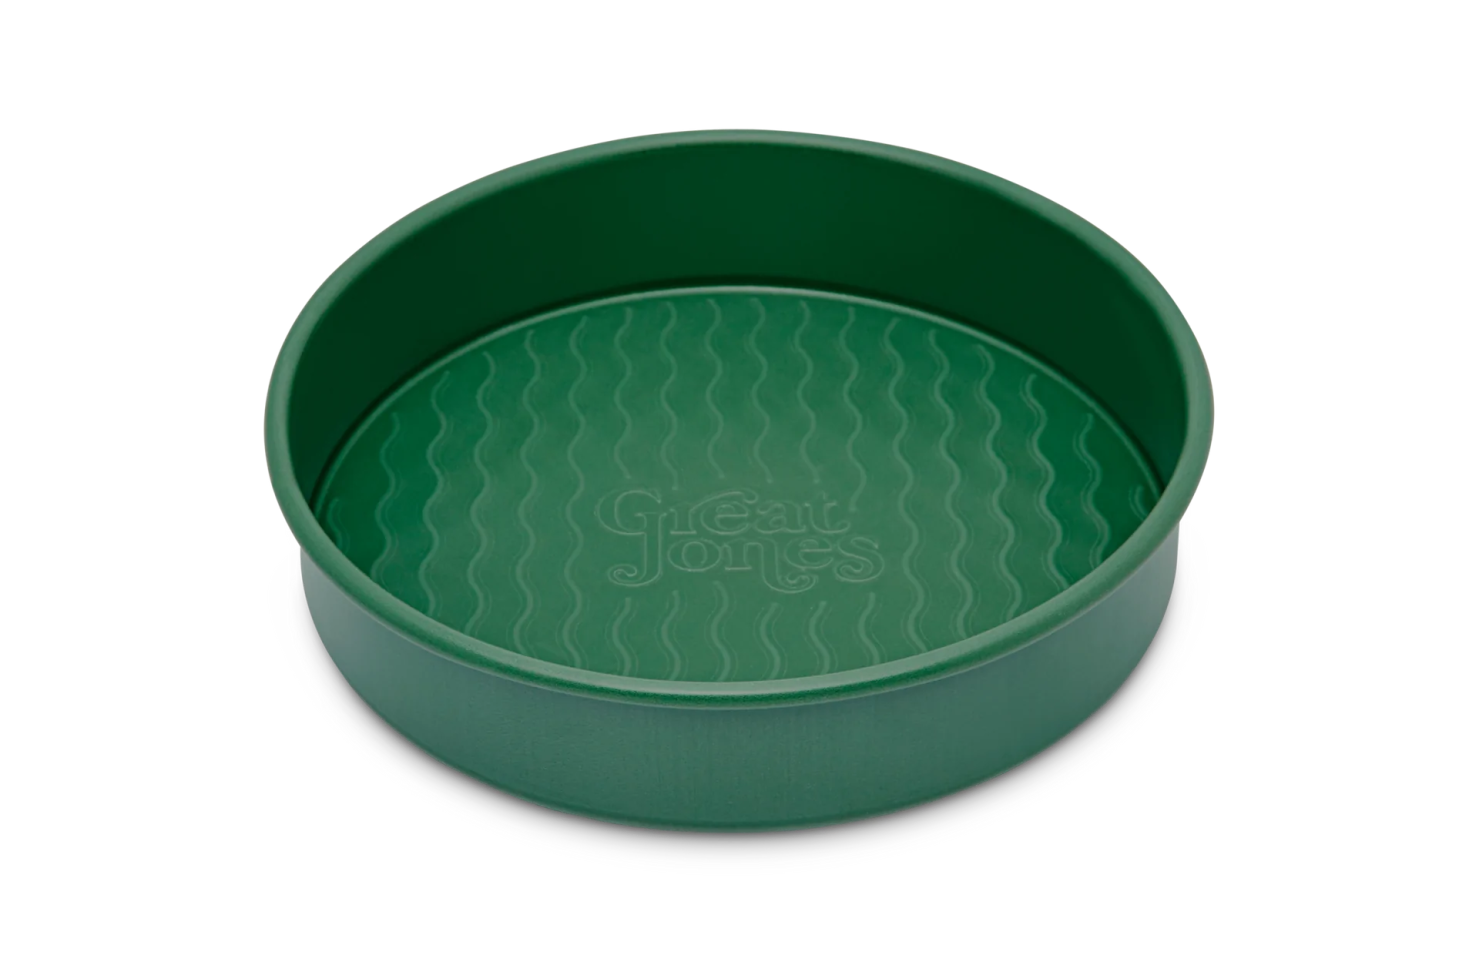 great jones patty cake cake pan in green on a white background